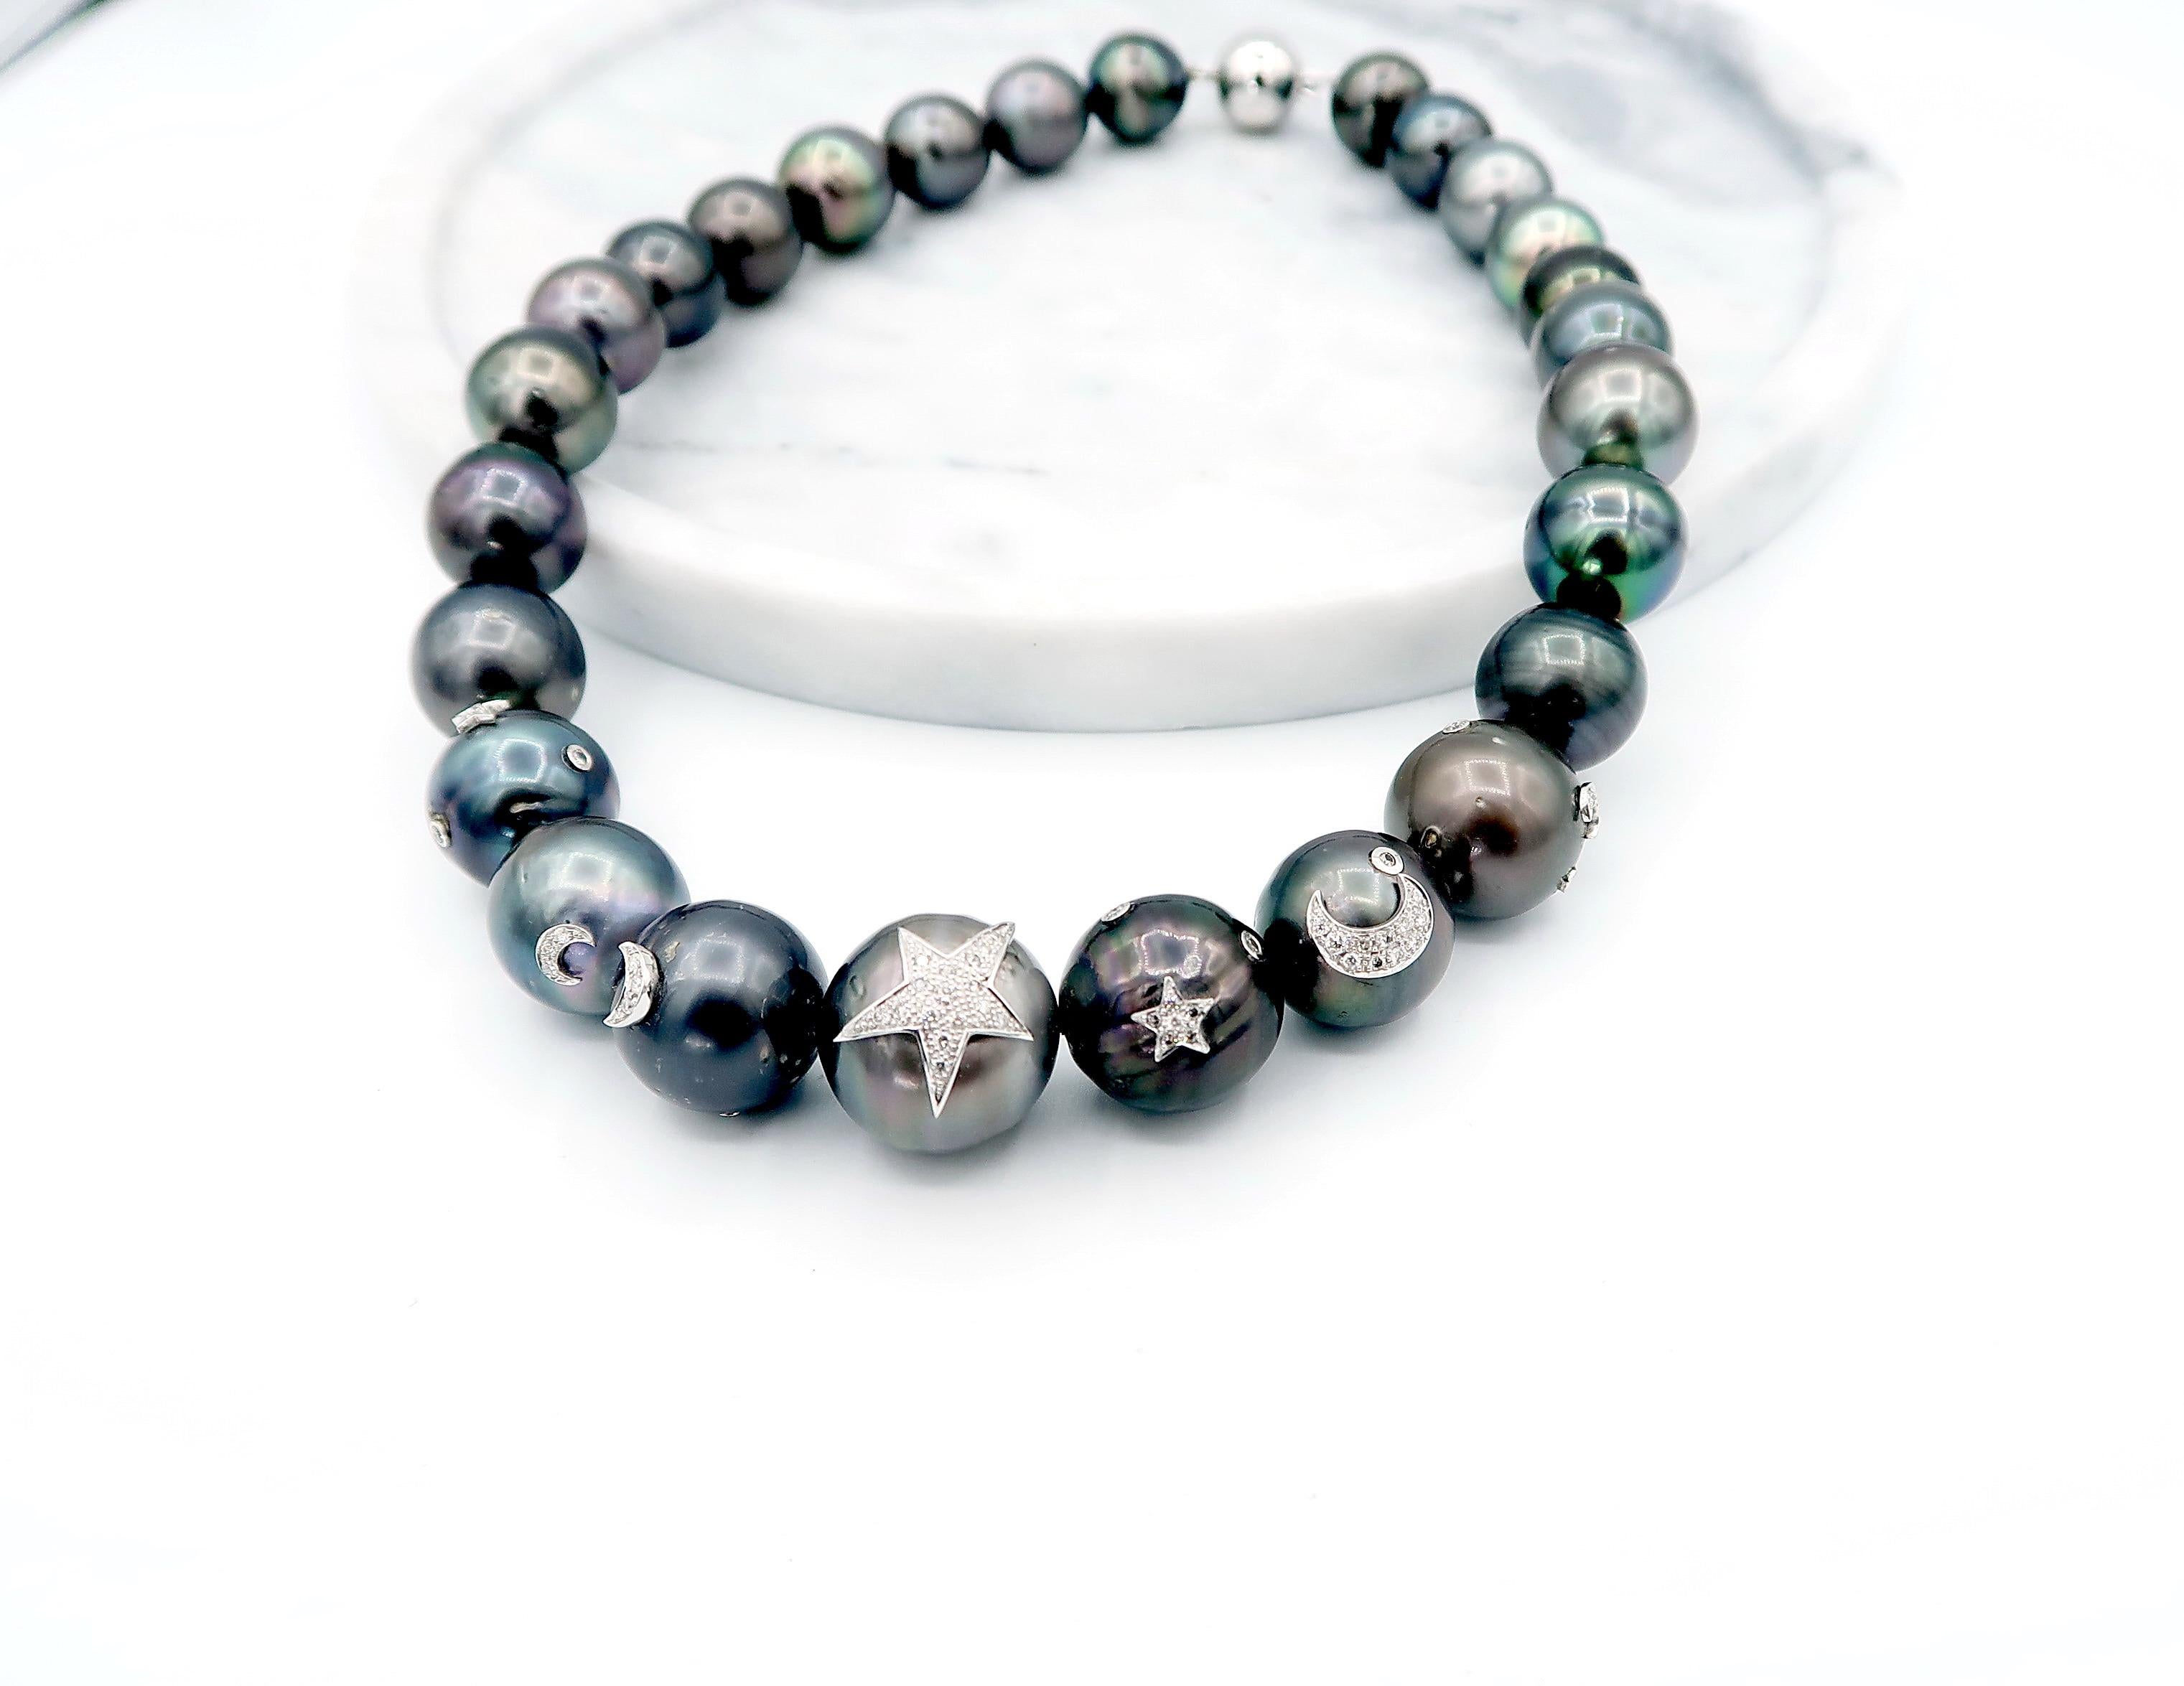 BOON Large Tahitian Pearl Necklace with Diamond Star & Moon 18K White Gold Embellishment

Length: 17.5